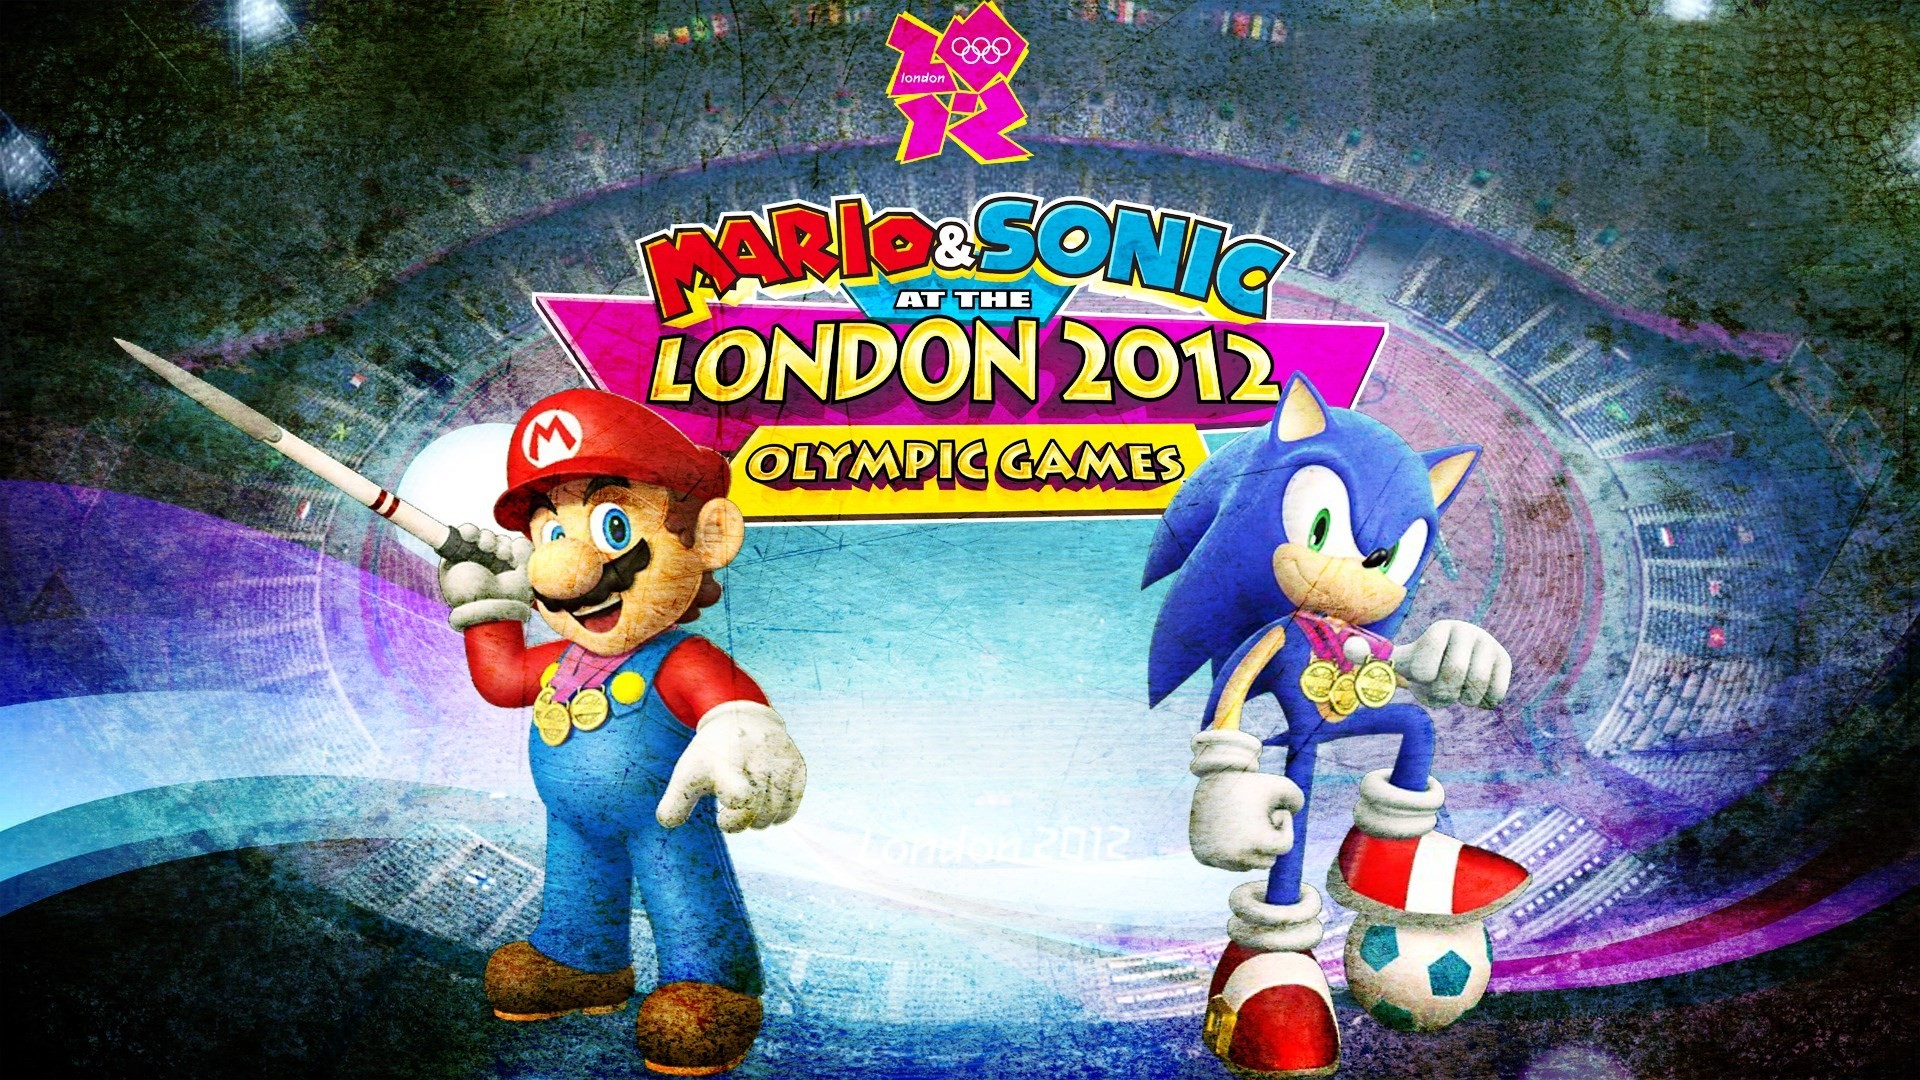 1920x1080 Images for Desktop: mario and sonic at the london 2012 olympic games  wallpaper by Hammond